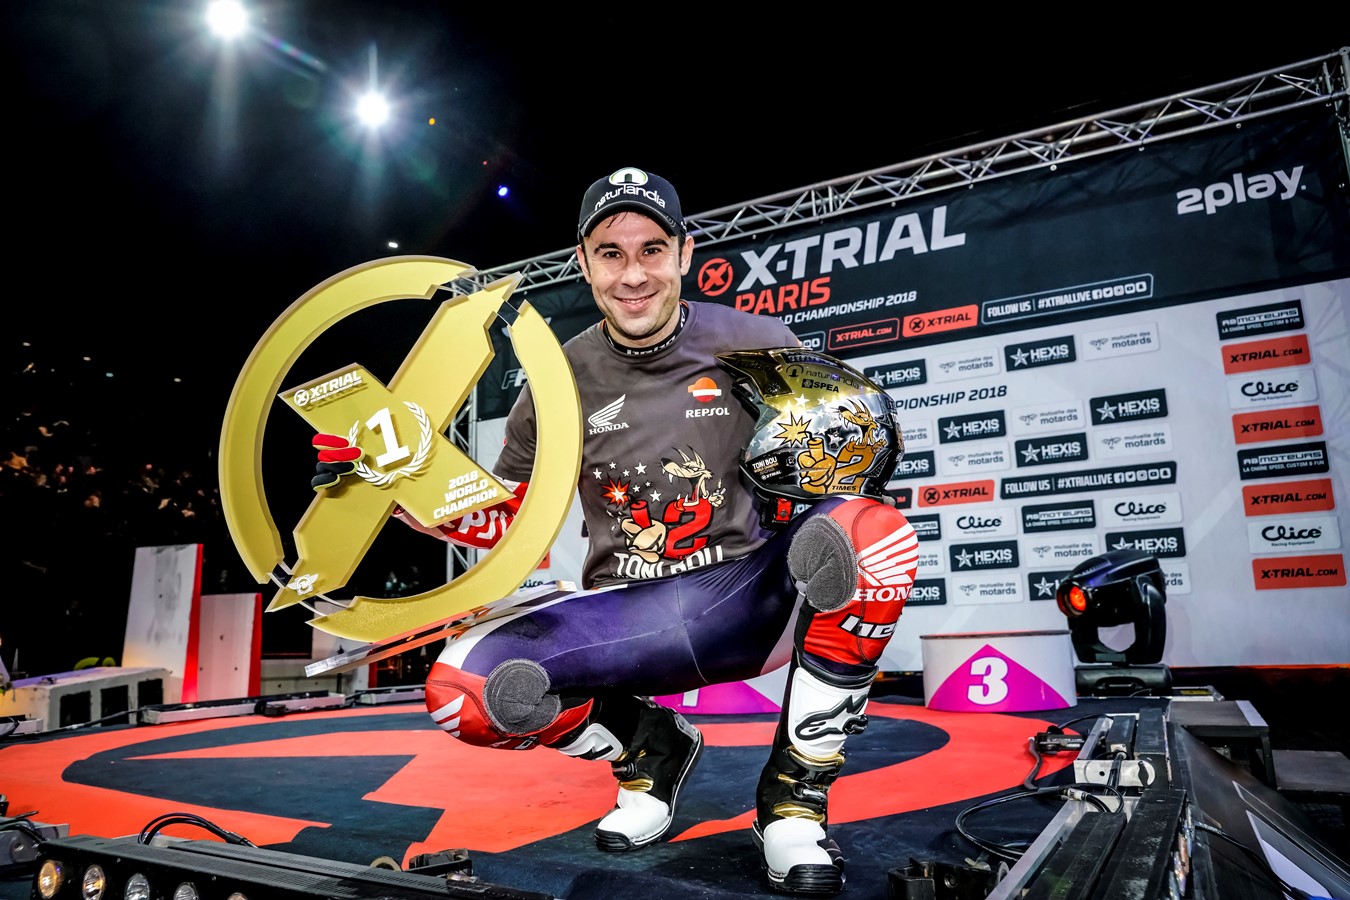 Toni Bou, mightier than ever, clinches a twelfth X-Trial title in Paris